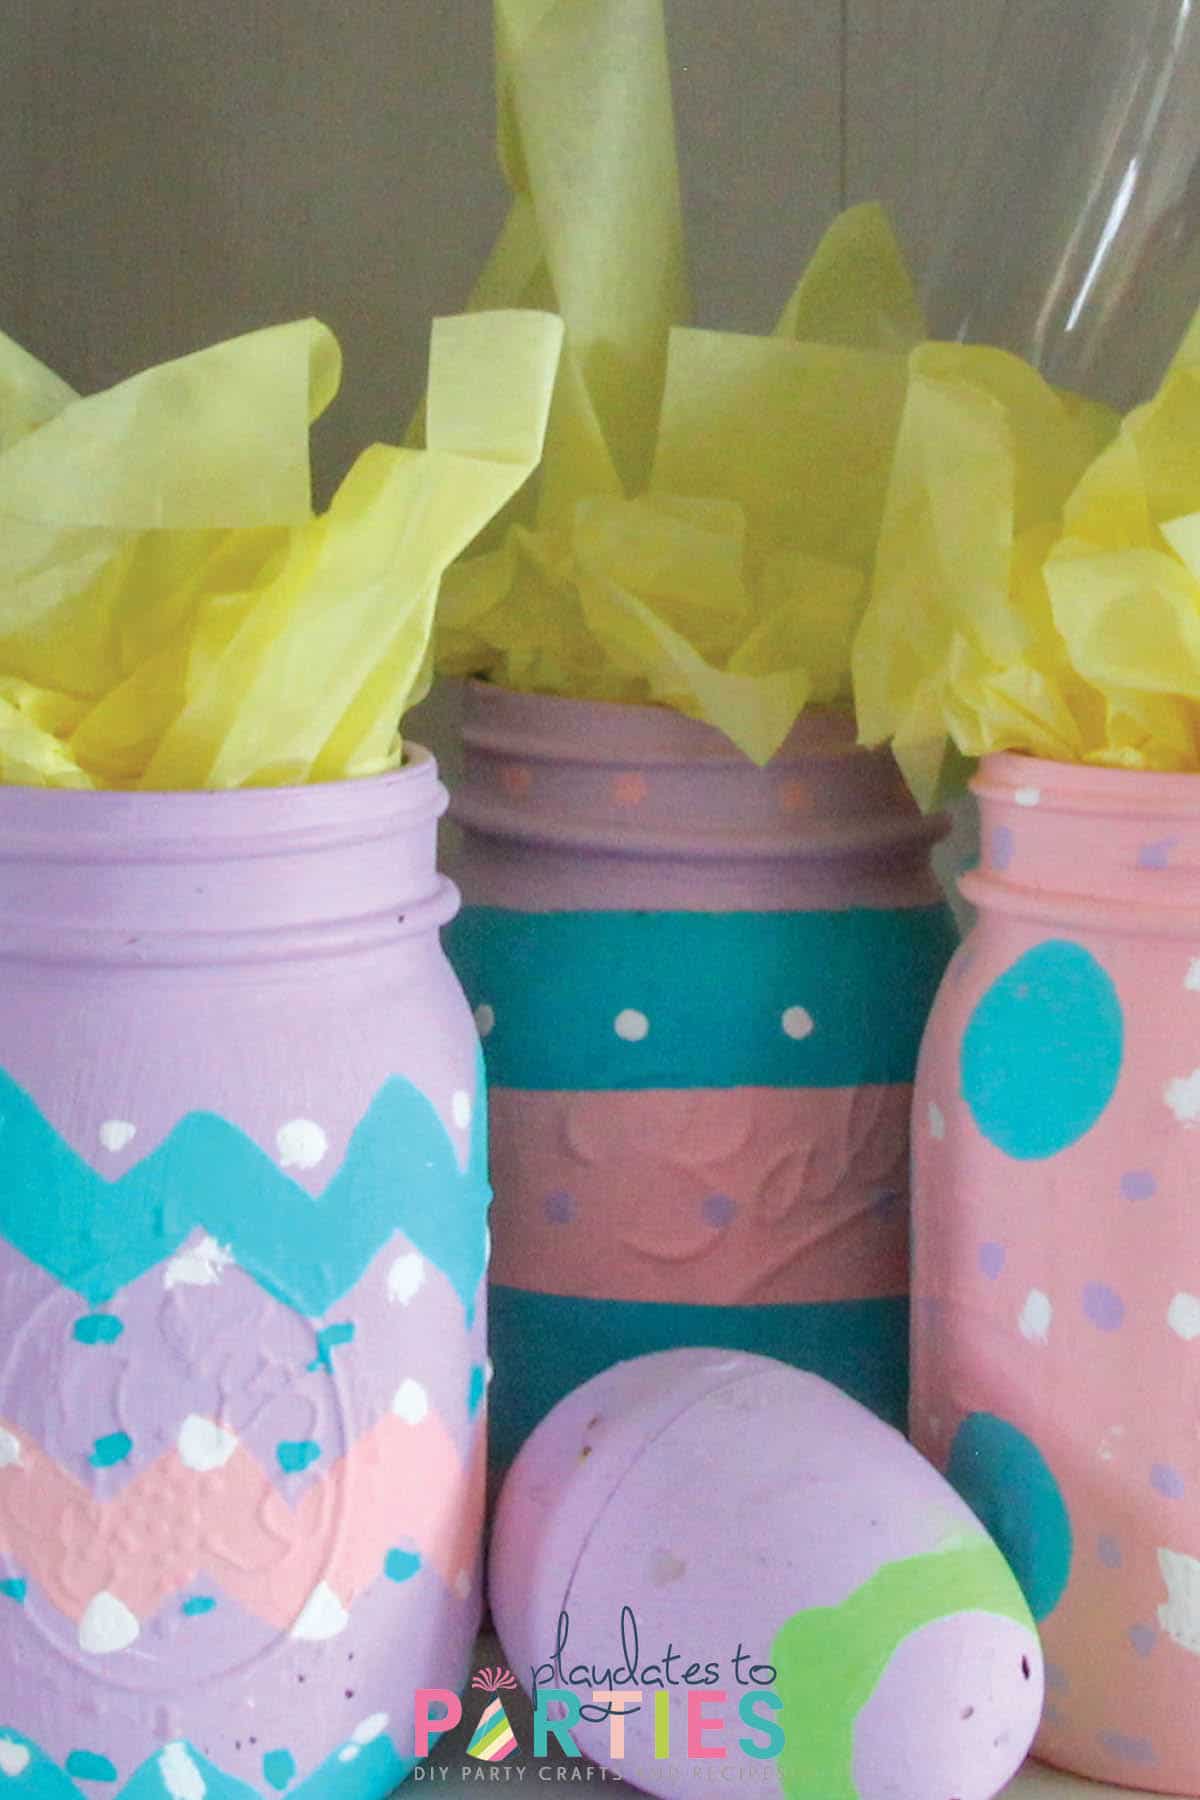 Mason jars painted in spring colors with zig zags polka dots and stripes